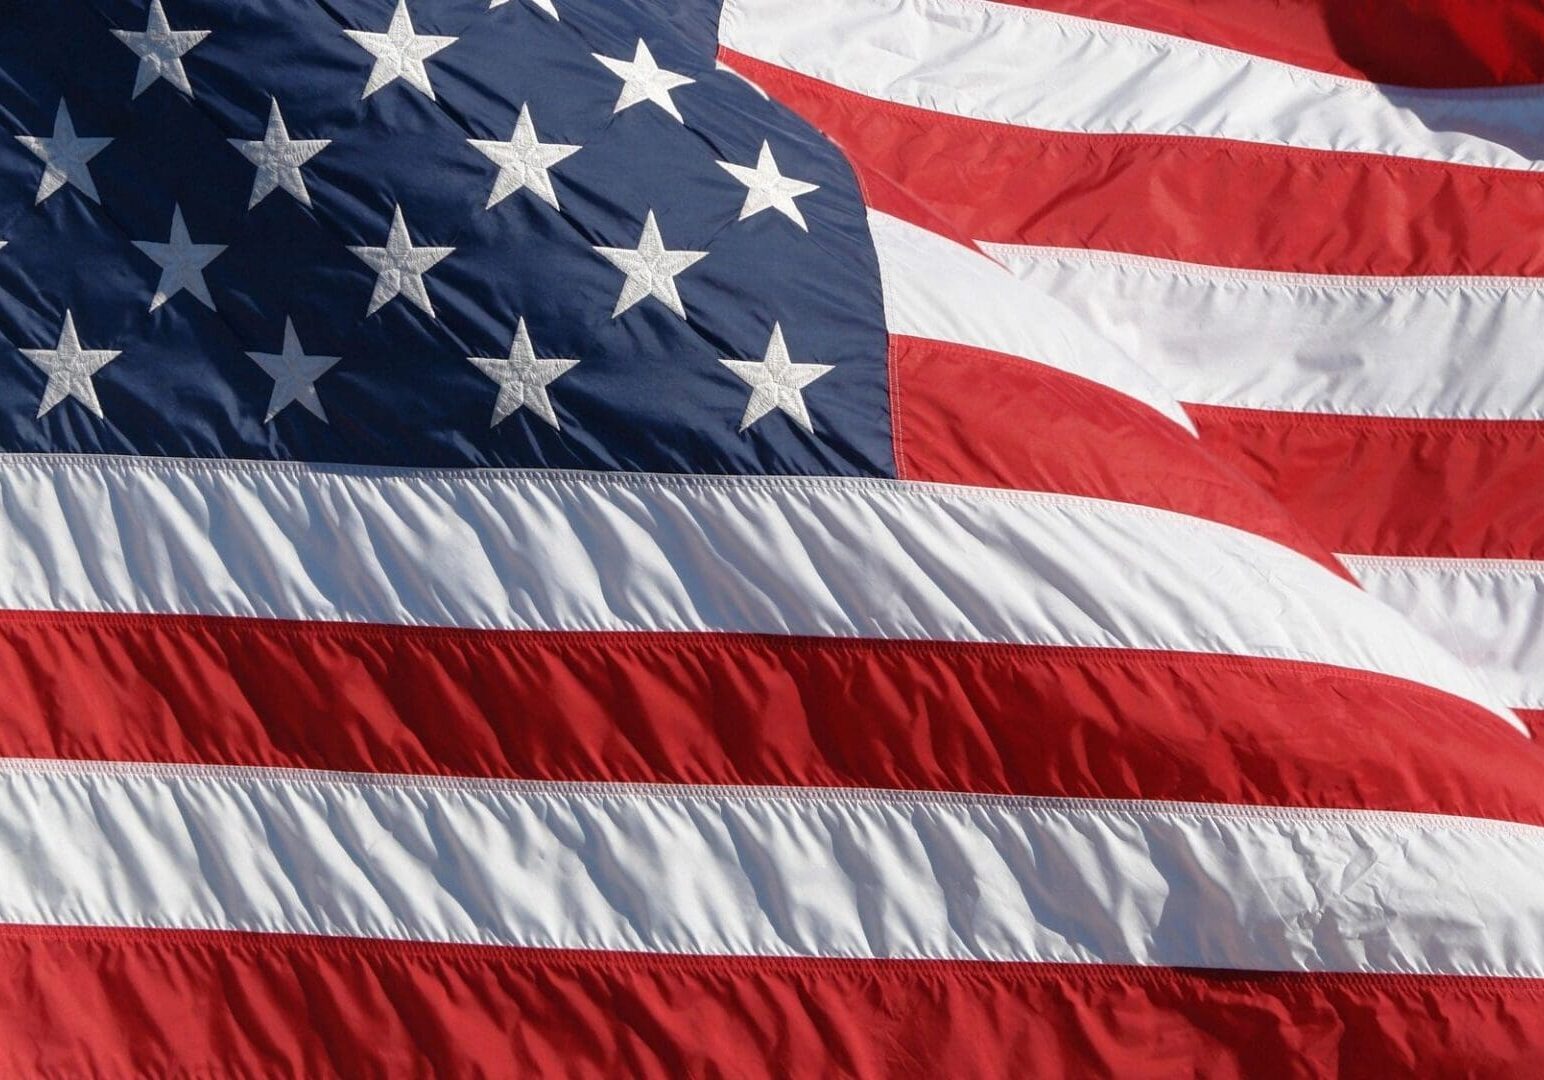 Close-up of the american flag, showing detailed texture of the fabric, with a focus on the stars and stripes in red, white, and blue.